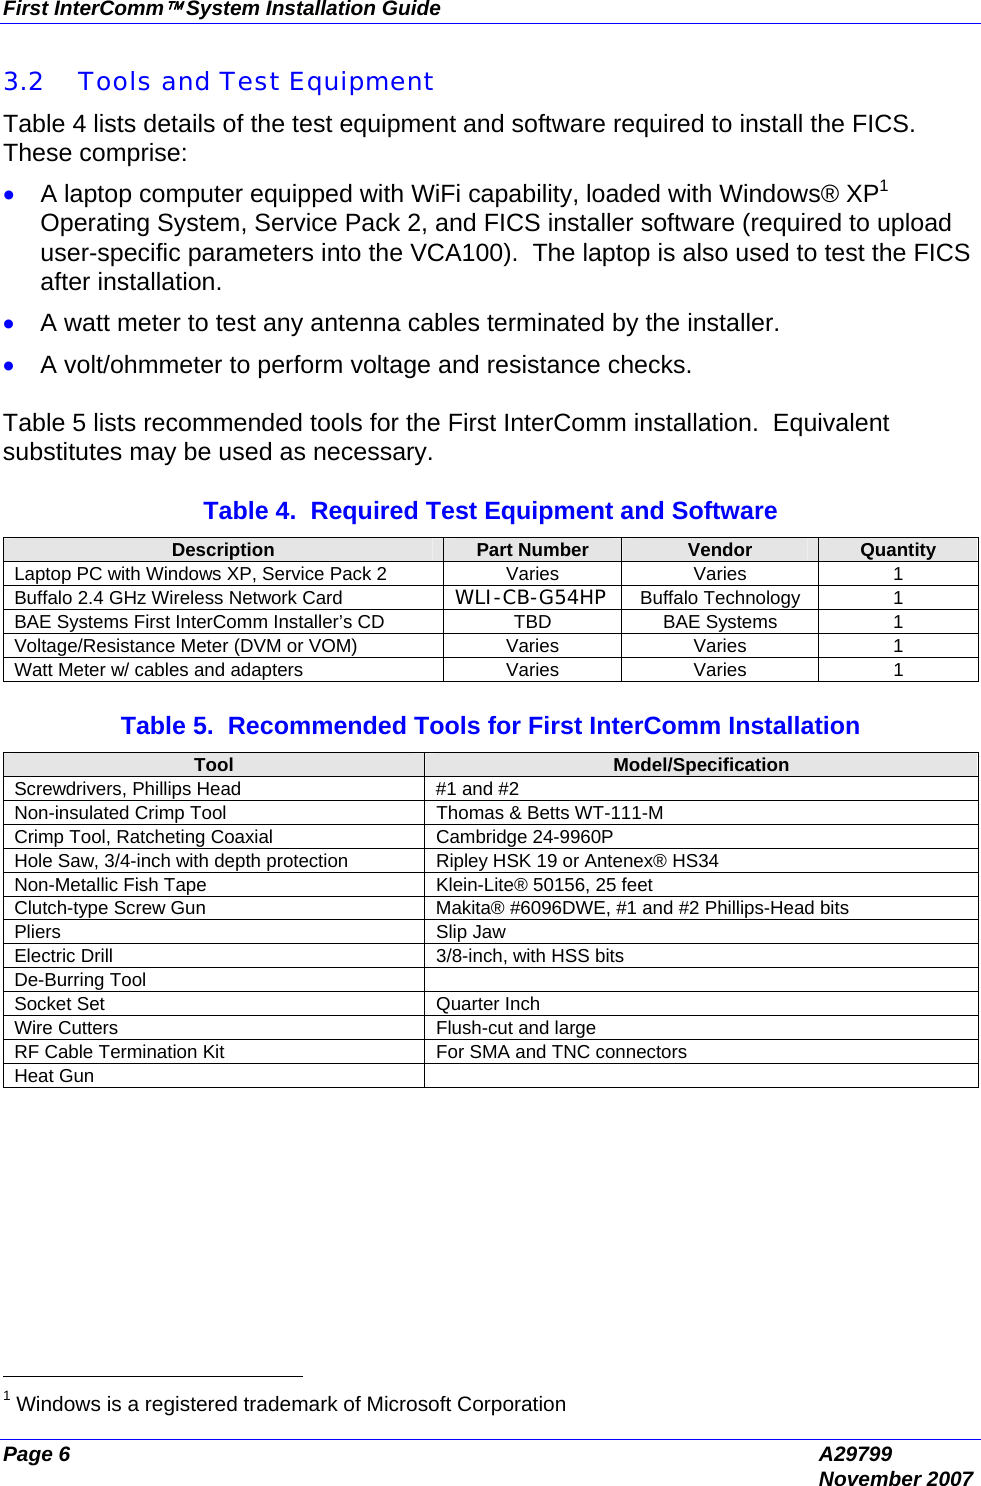 First InterComm™ System Installation Guide Page 6  A29799  November 2007 3.2 Tools and Test Equipment  Table 4 lists details of the test equipment and software required to install the FICS.  These comprise: • A laptop computer equipped with WiFi capability, loaded with Windows® XP1 Operating System, Service Pack 2, and FICS installer software (required to upload user-specific parameters into the VCA100).  The laptop is also used to test the FICS after installation.  • A watt meter to test any antenna cables terminated by the installer. • A volt/ohmmeter to perform voltage and resistance checks.  Table 5 lists recommended tools for the First InterComm installation.  Equivalent substitutes may be used as necessary.  Table 4.  Required Test Equipment and Software Description  Part Number  Vendor  Quantity Laptop PC with Windows XP, Service Pack 2  Varies  Varies  1 Buffalo 2.4 GHz Wireless Network Card  WLI-CB-G54HP  Buffalo Technology   1 BAE Systems First InterComm Installer’s CD  TBD  BAE Systems  1 Voltage/Resistance Meter (DVM or VOM)  Varies  Varies  1 Watt Meter w/ cables and adapters  Varies  Varies  1  Table 5.  Recommended Tools for First InterComm Installation Tool  Model/Specification Screwdrivers, Phillips Head  #1 and #2  Non-insulated Crimp Tool  Thomas &amp; Betts WT-111-M Crimp Tool, Ratcheting Coaxial  Cambridge 24-9960P Hole Saw, 3/4-inch with depth protection  Ripley HSK 19 or Antenex® HS34 Non-Metallic Fish Tape  Klein-Lite® 50156, 25 feet Clutch-type Screw Gun  Makita® #6096DWE, #1 and #2 Phillips-Head bits Pliers Slip Jaw Electric Drill  3/8-inch, with HSS bits De-Burring Tool   Socket Set  Quarter Inch Wire Cutters  Flush-cut and large RF Cable Termination Kit  For SMA and TNC connectors Heat Gun                                               1 Windows is a registered trademark of Microsoft Corporation 